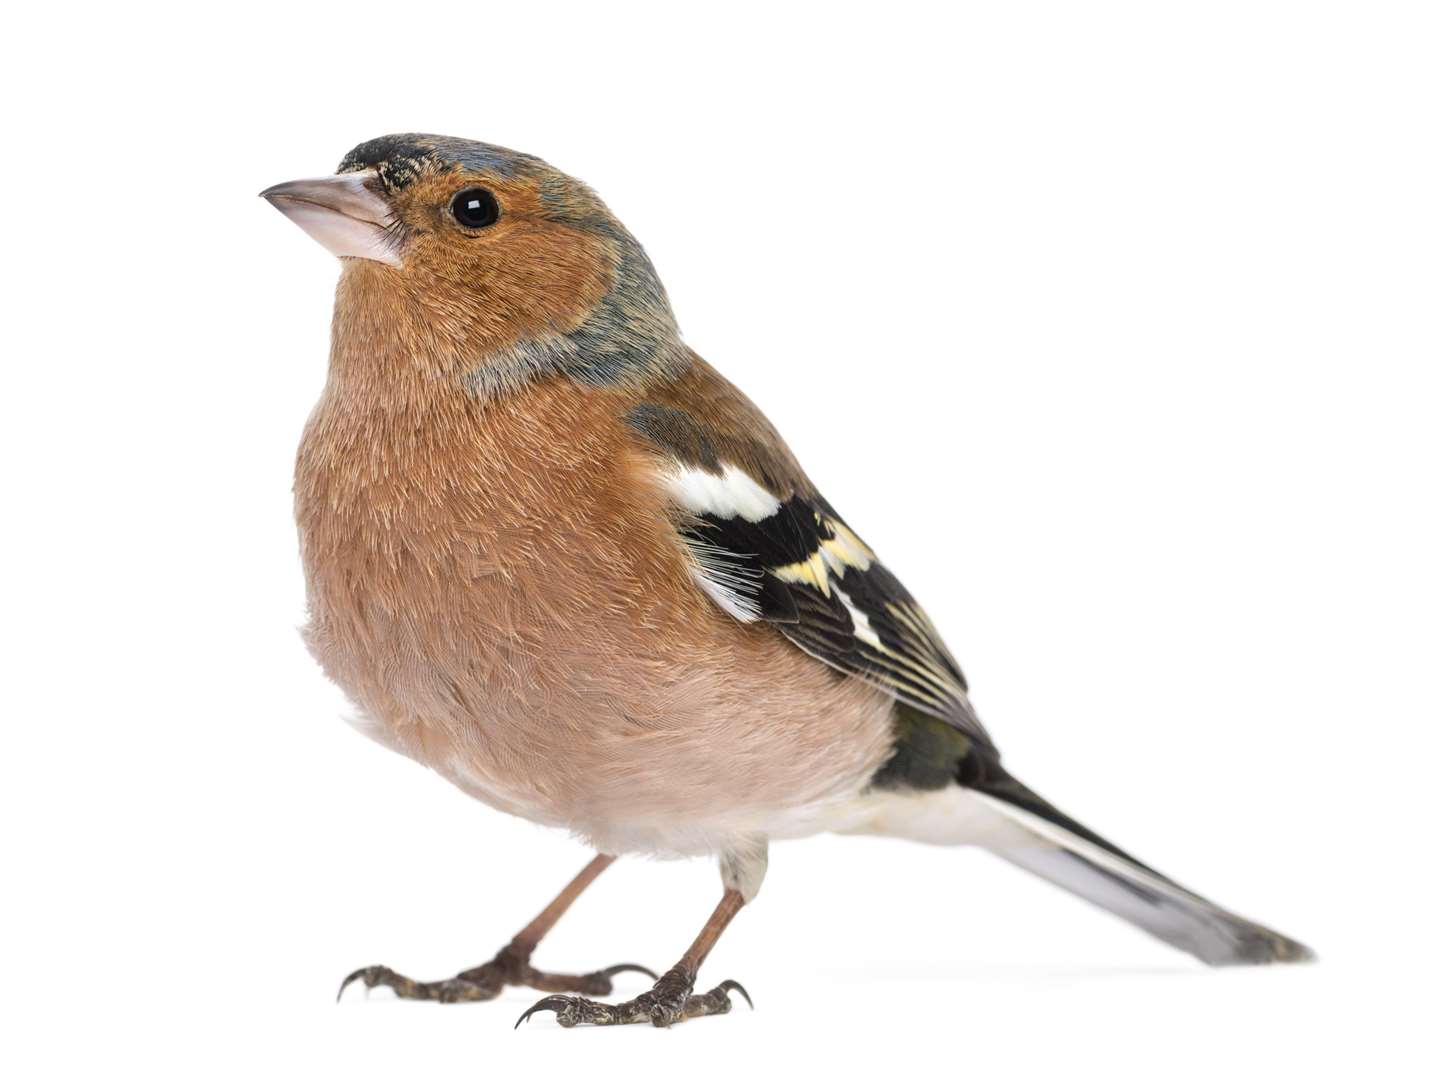 Crossbills, chaffinches (pictured), mealy redpolls, goldfinches and mosaic canaries were among the birds stolen